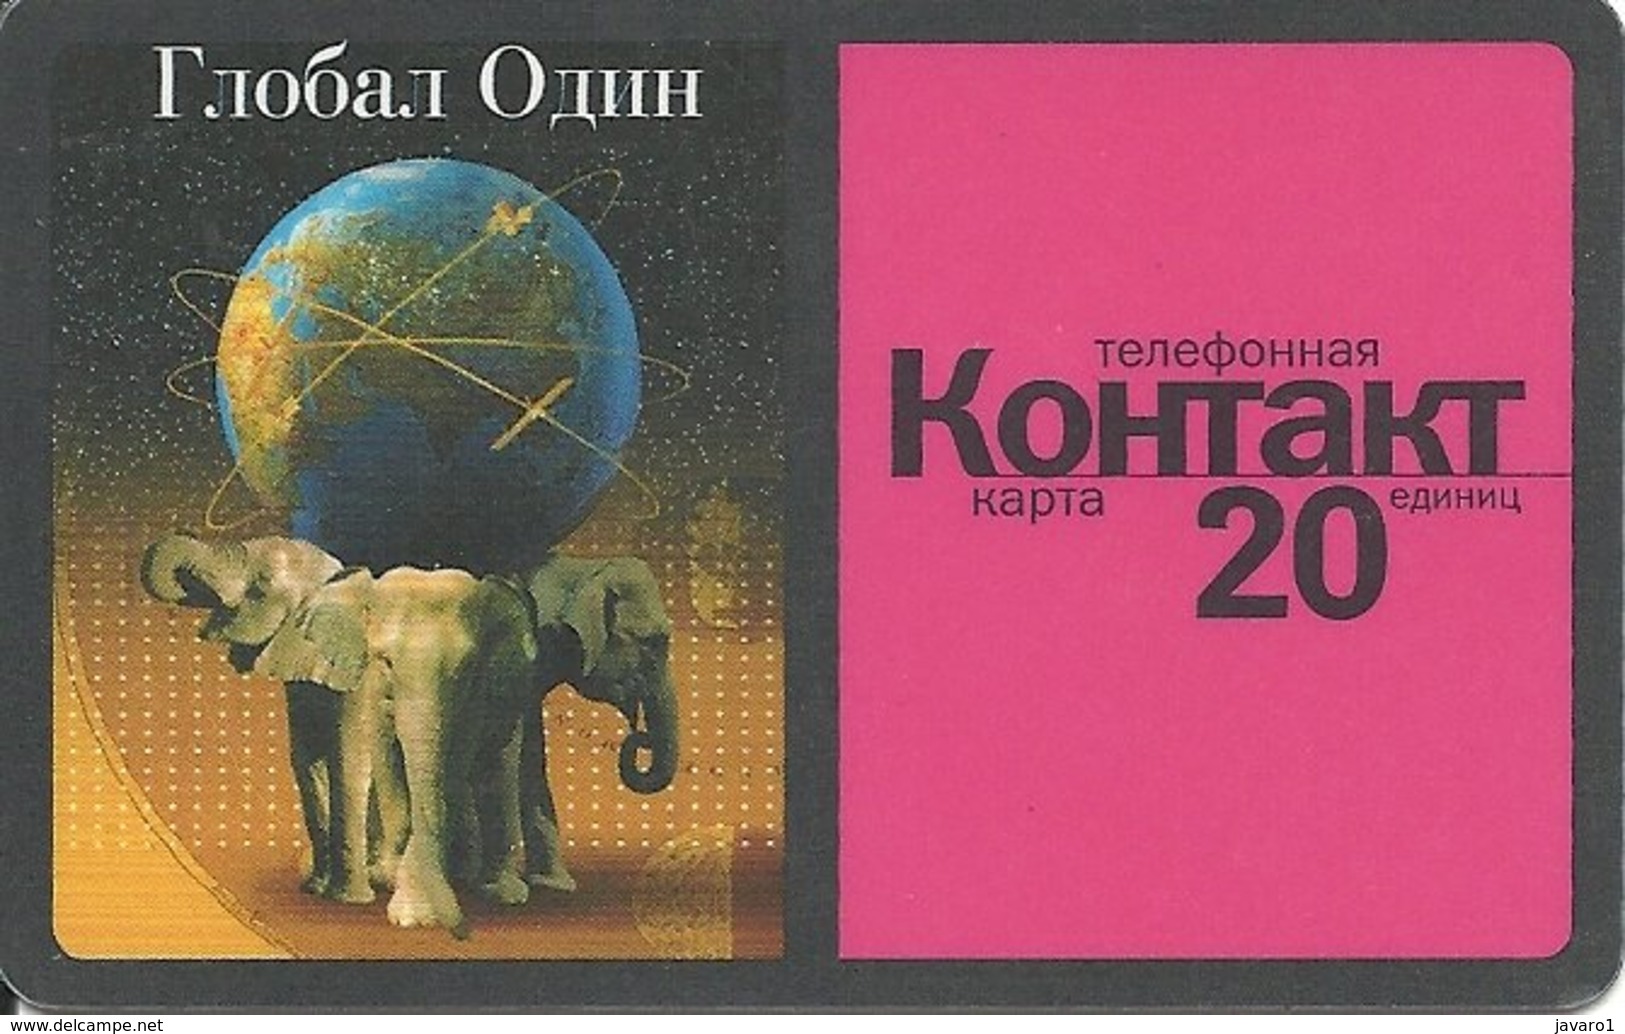 GLOBAL ONE Elephant : 10503D 20 Red KONTAKT 06.2000 USED Exp: 30.06.2000 - Russia